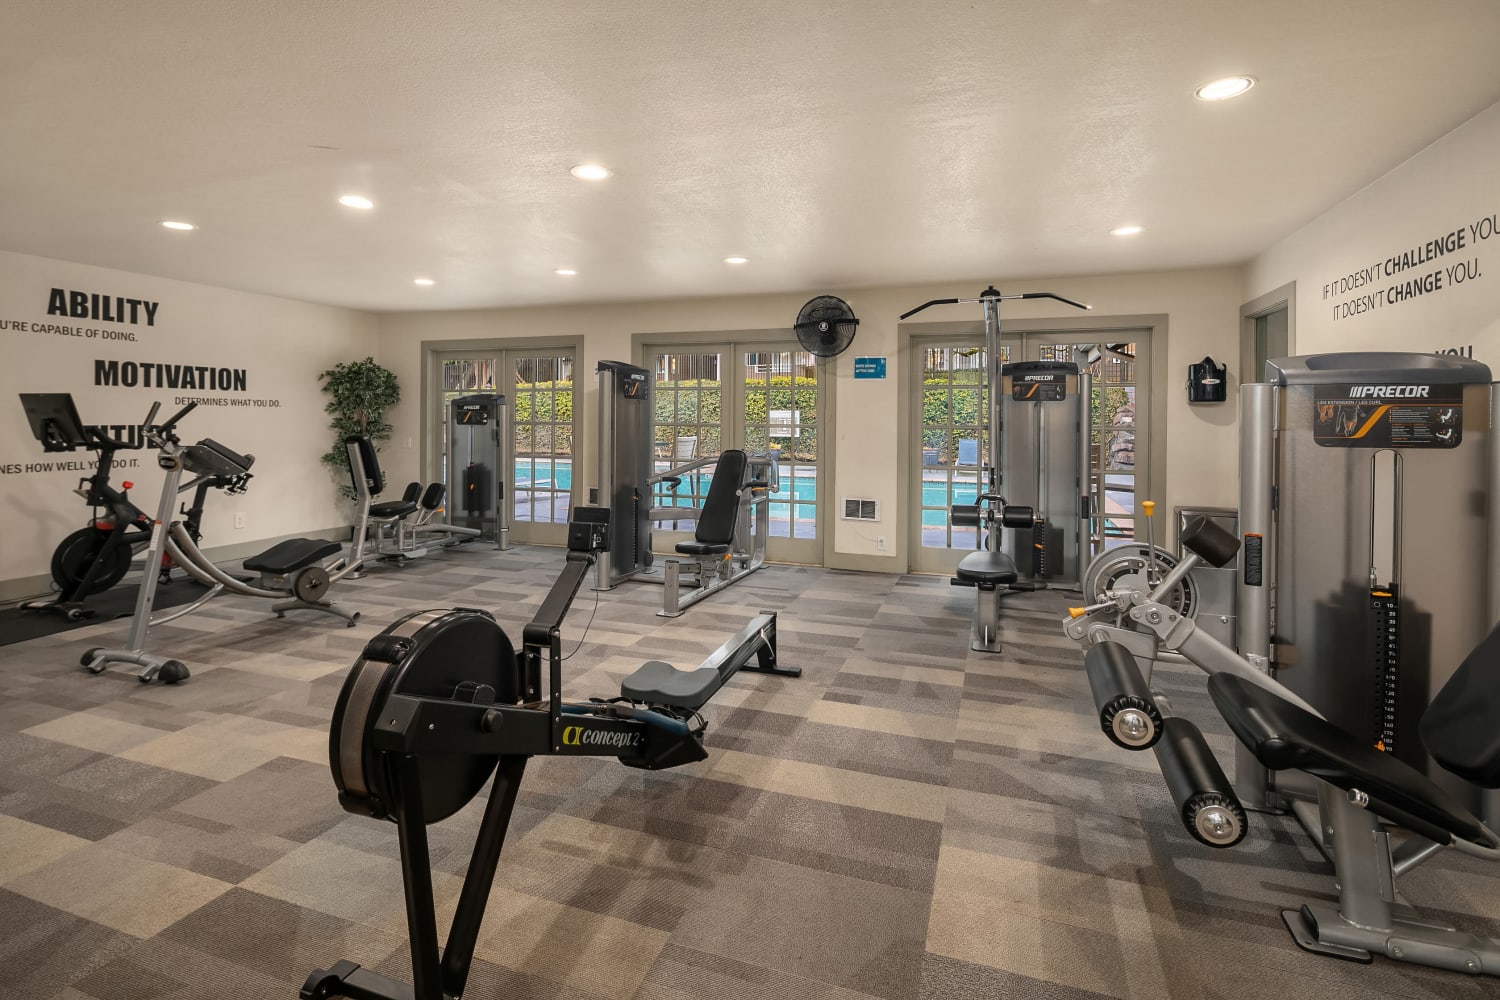 Fitness center at Overlook at Lakemont in Bellevue, Washington